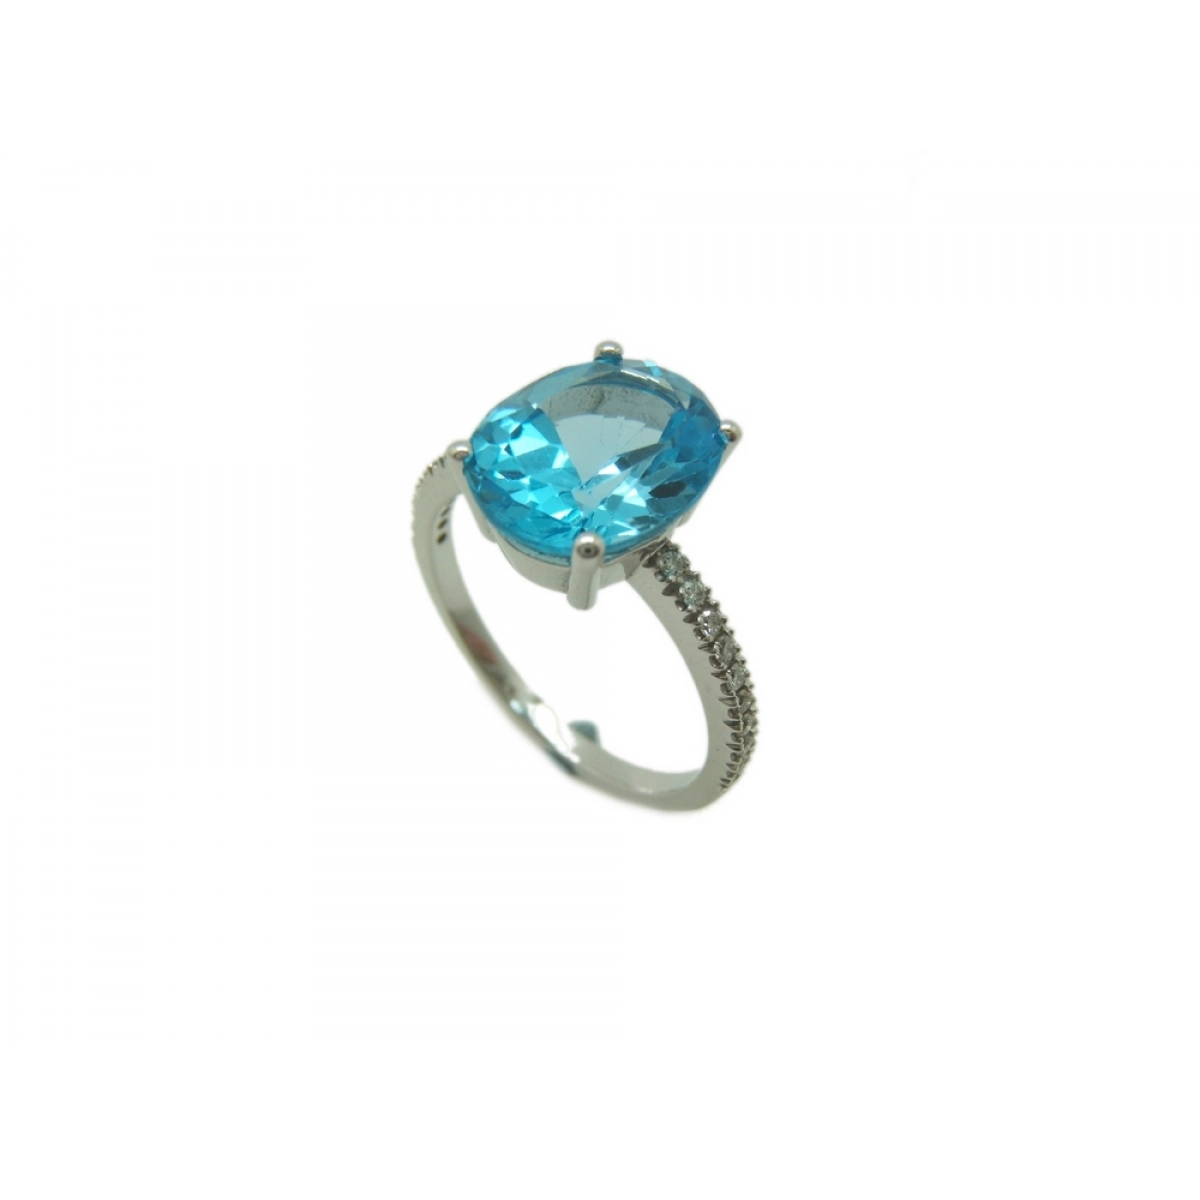 RING BLUE TOPAZ AND BRIGHT-396 B-79 A-396